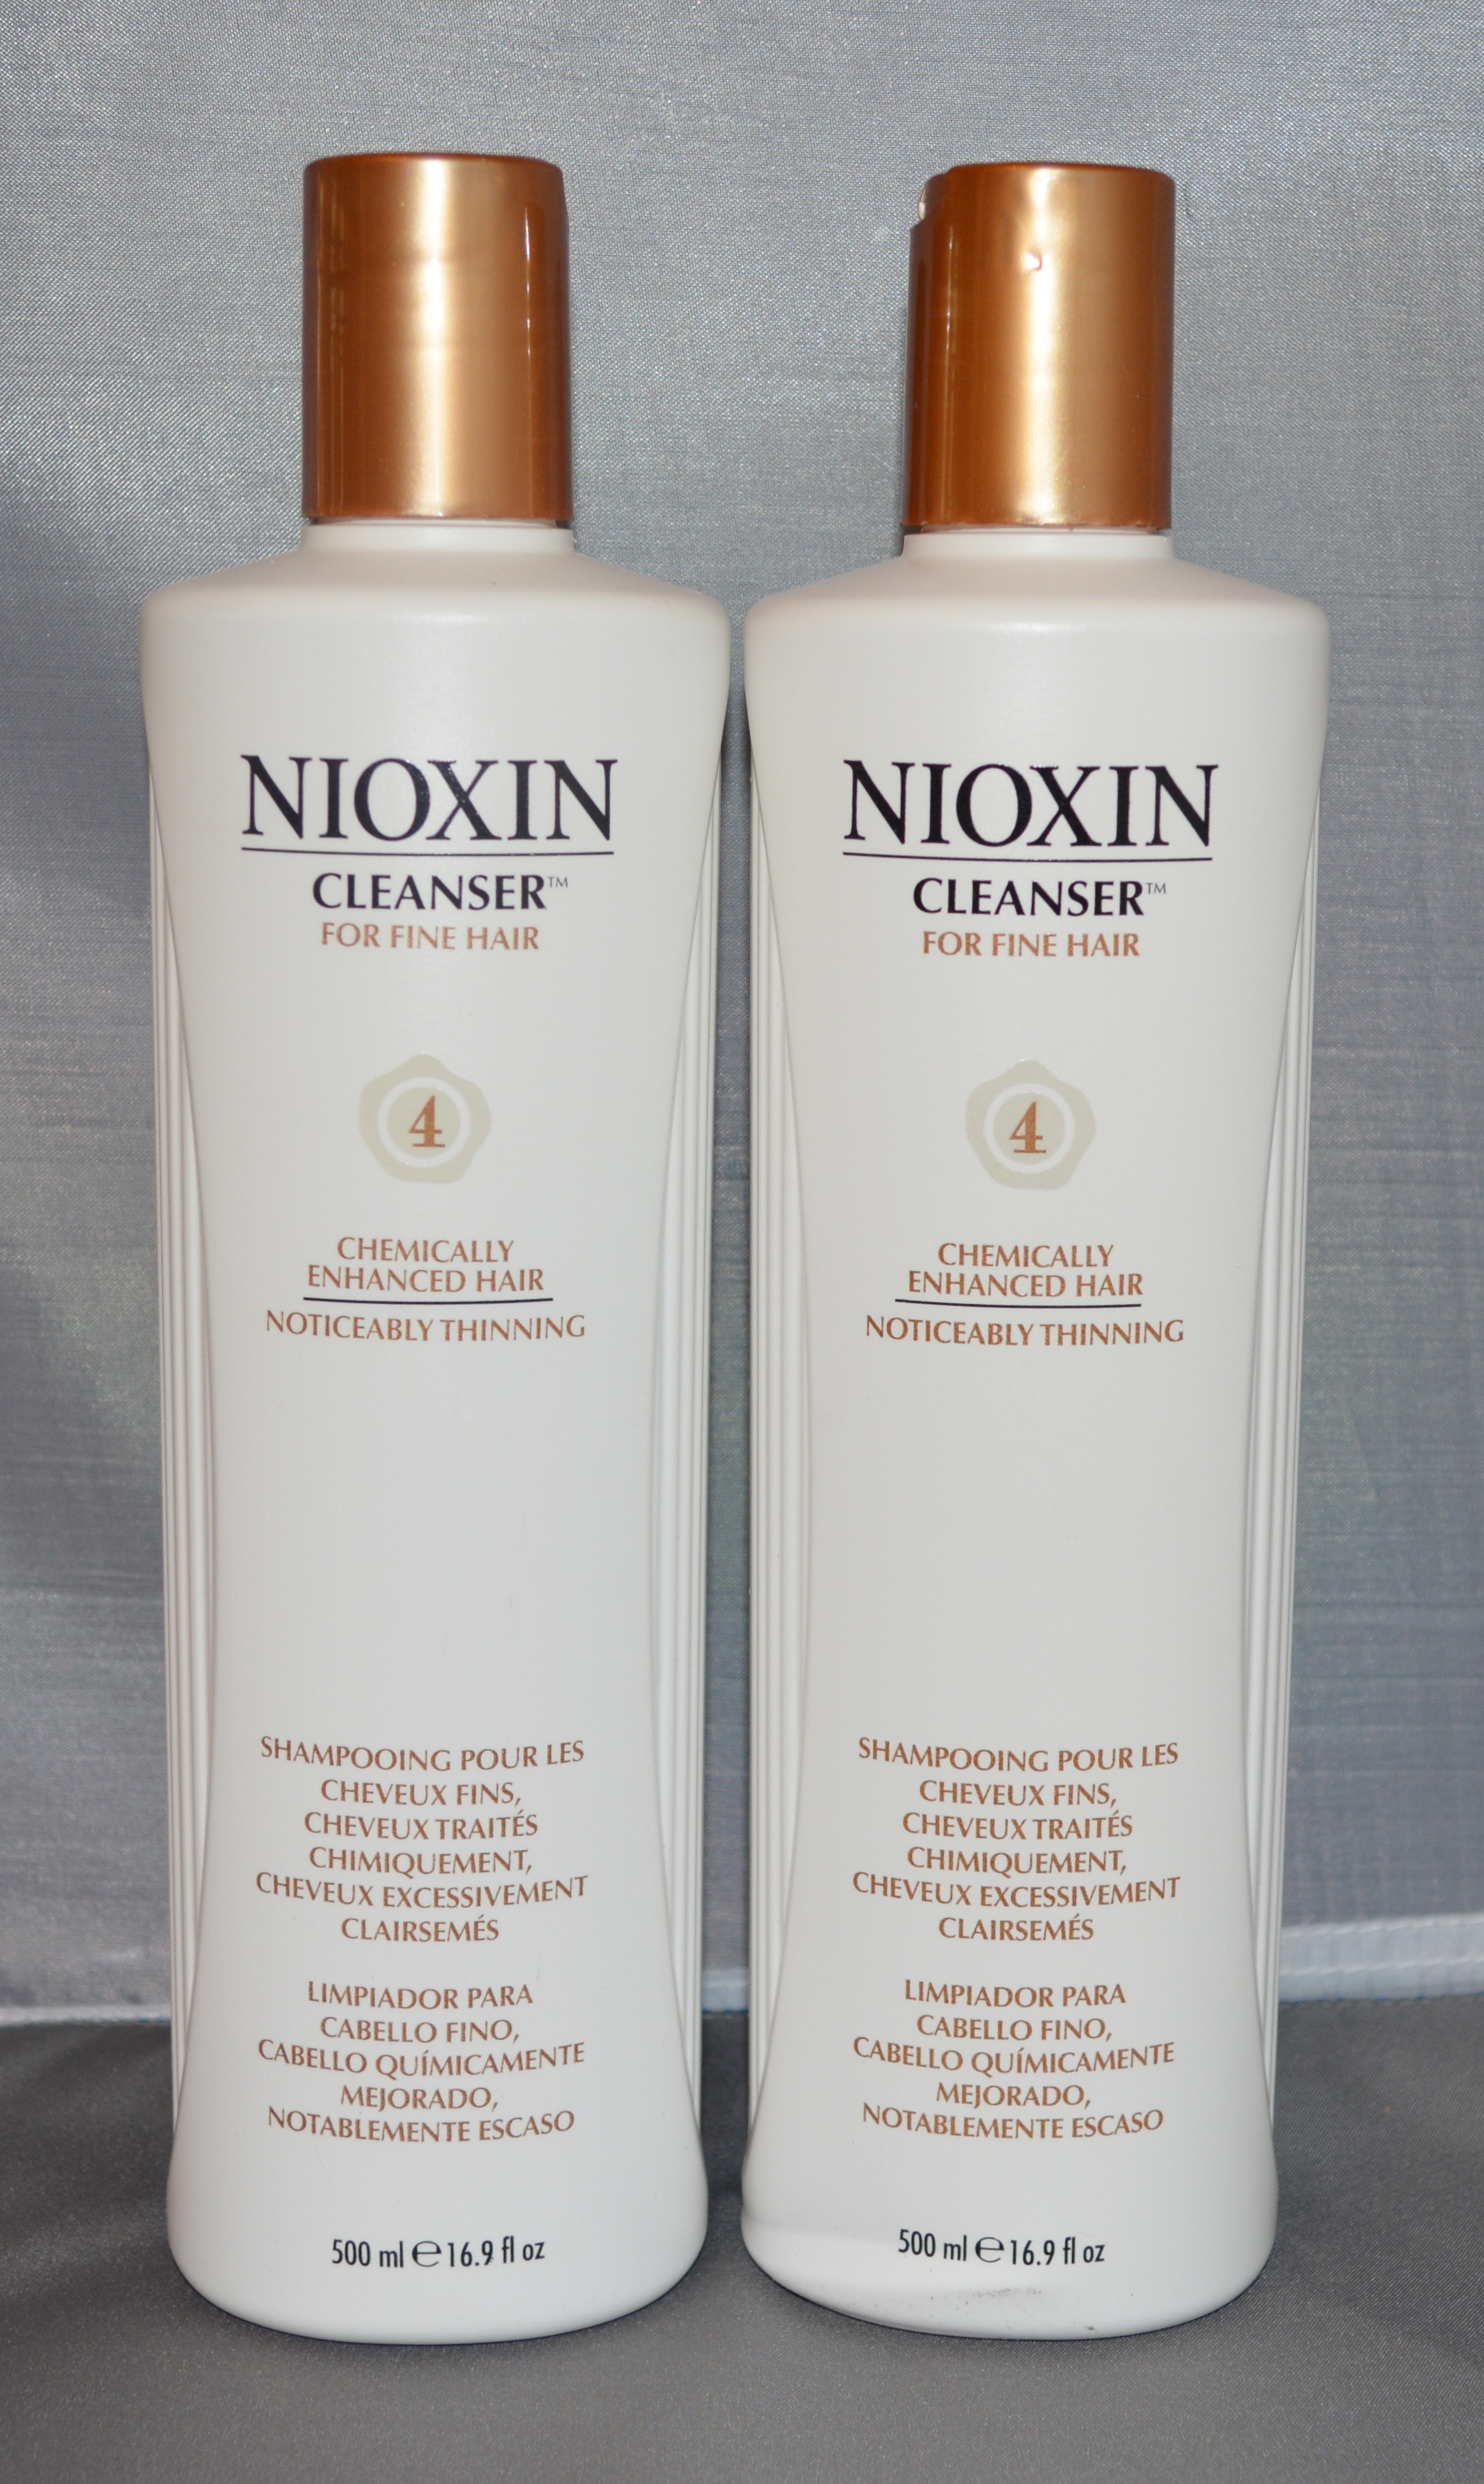 Nioxin Cleanser System 4 Fine/Treated/Noticeably Thinning Hair 16.9 oz (2 pack) Total = 33.8oz